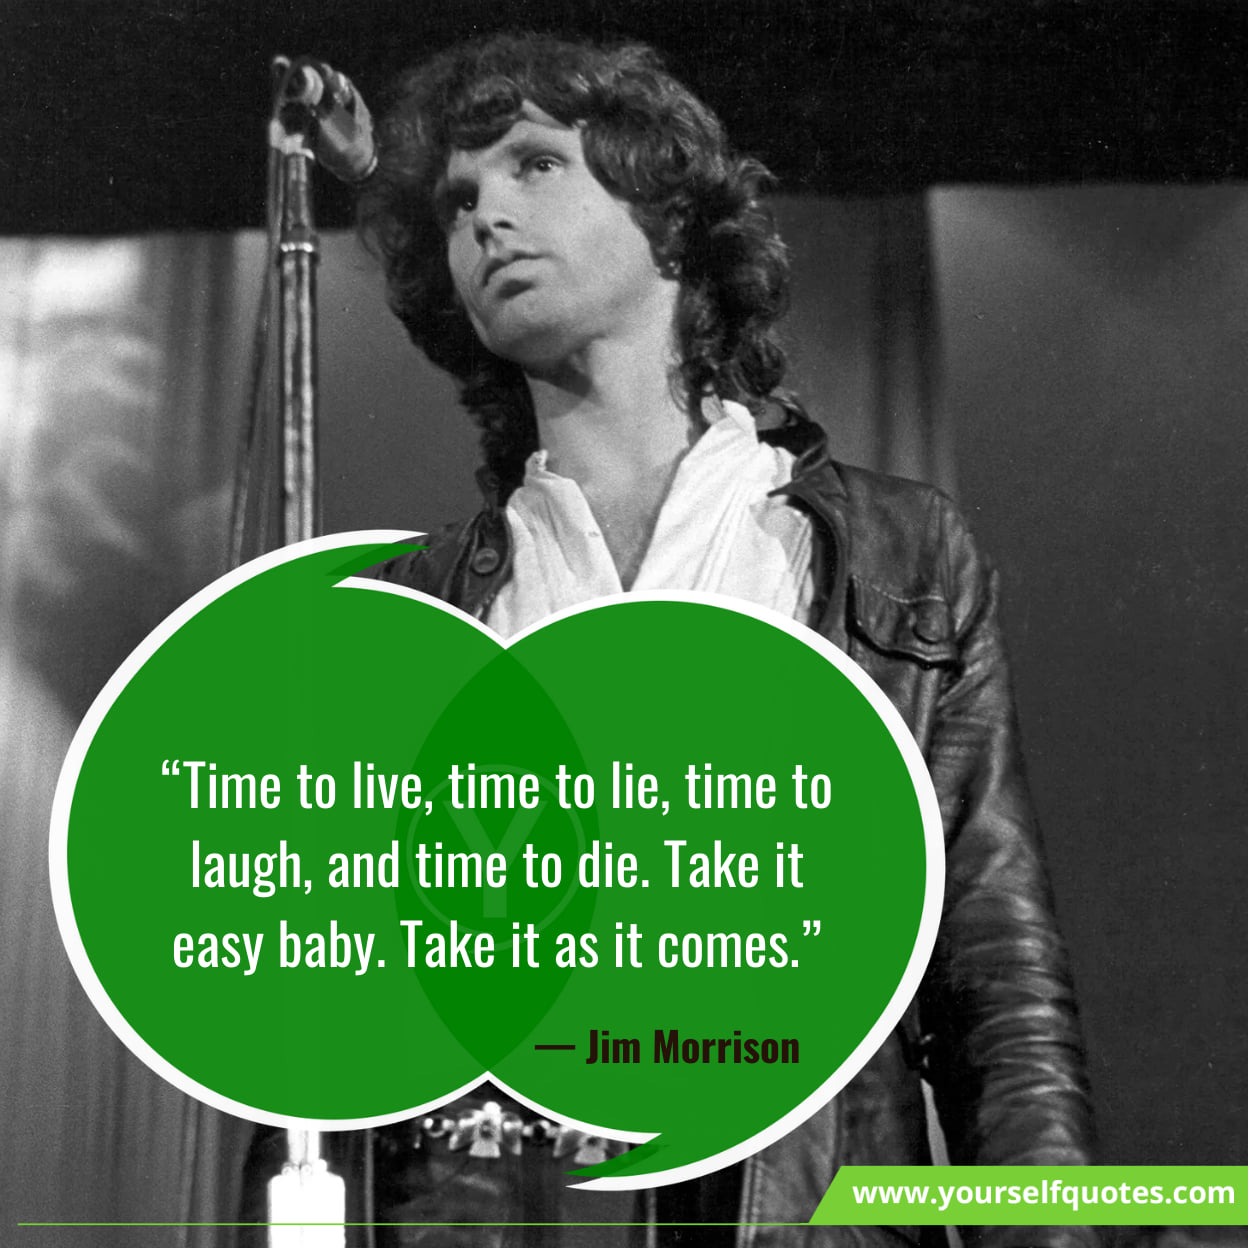 Jim Morrison Quotes On Life